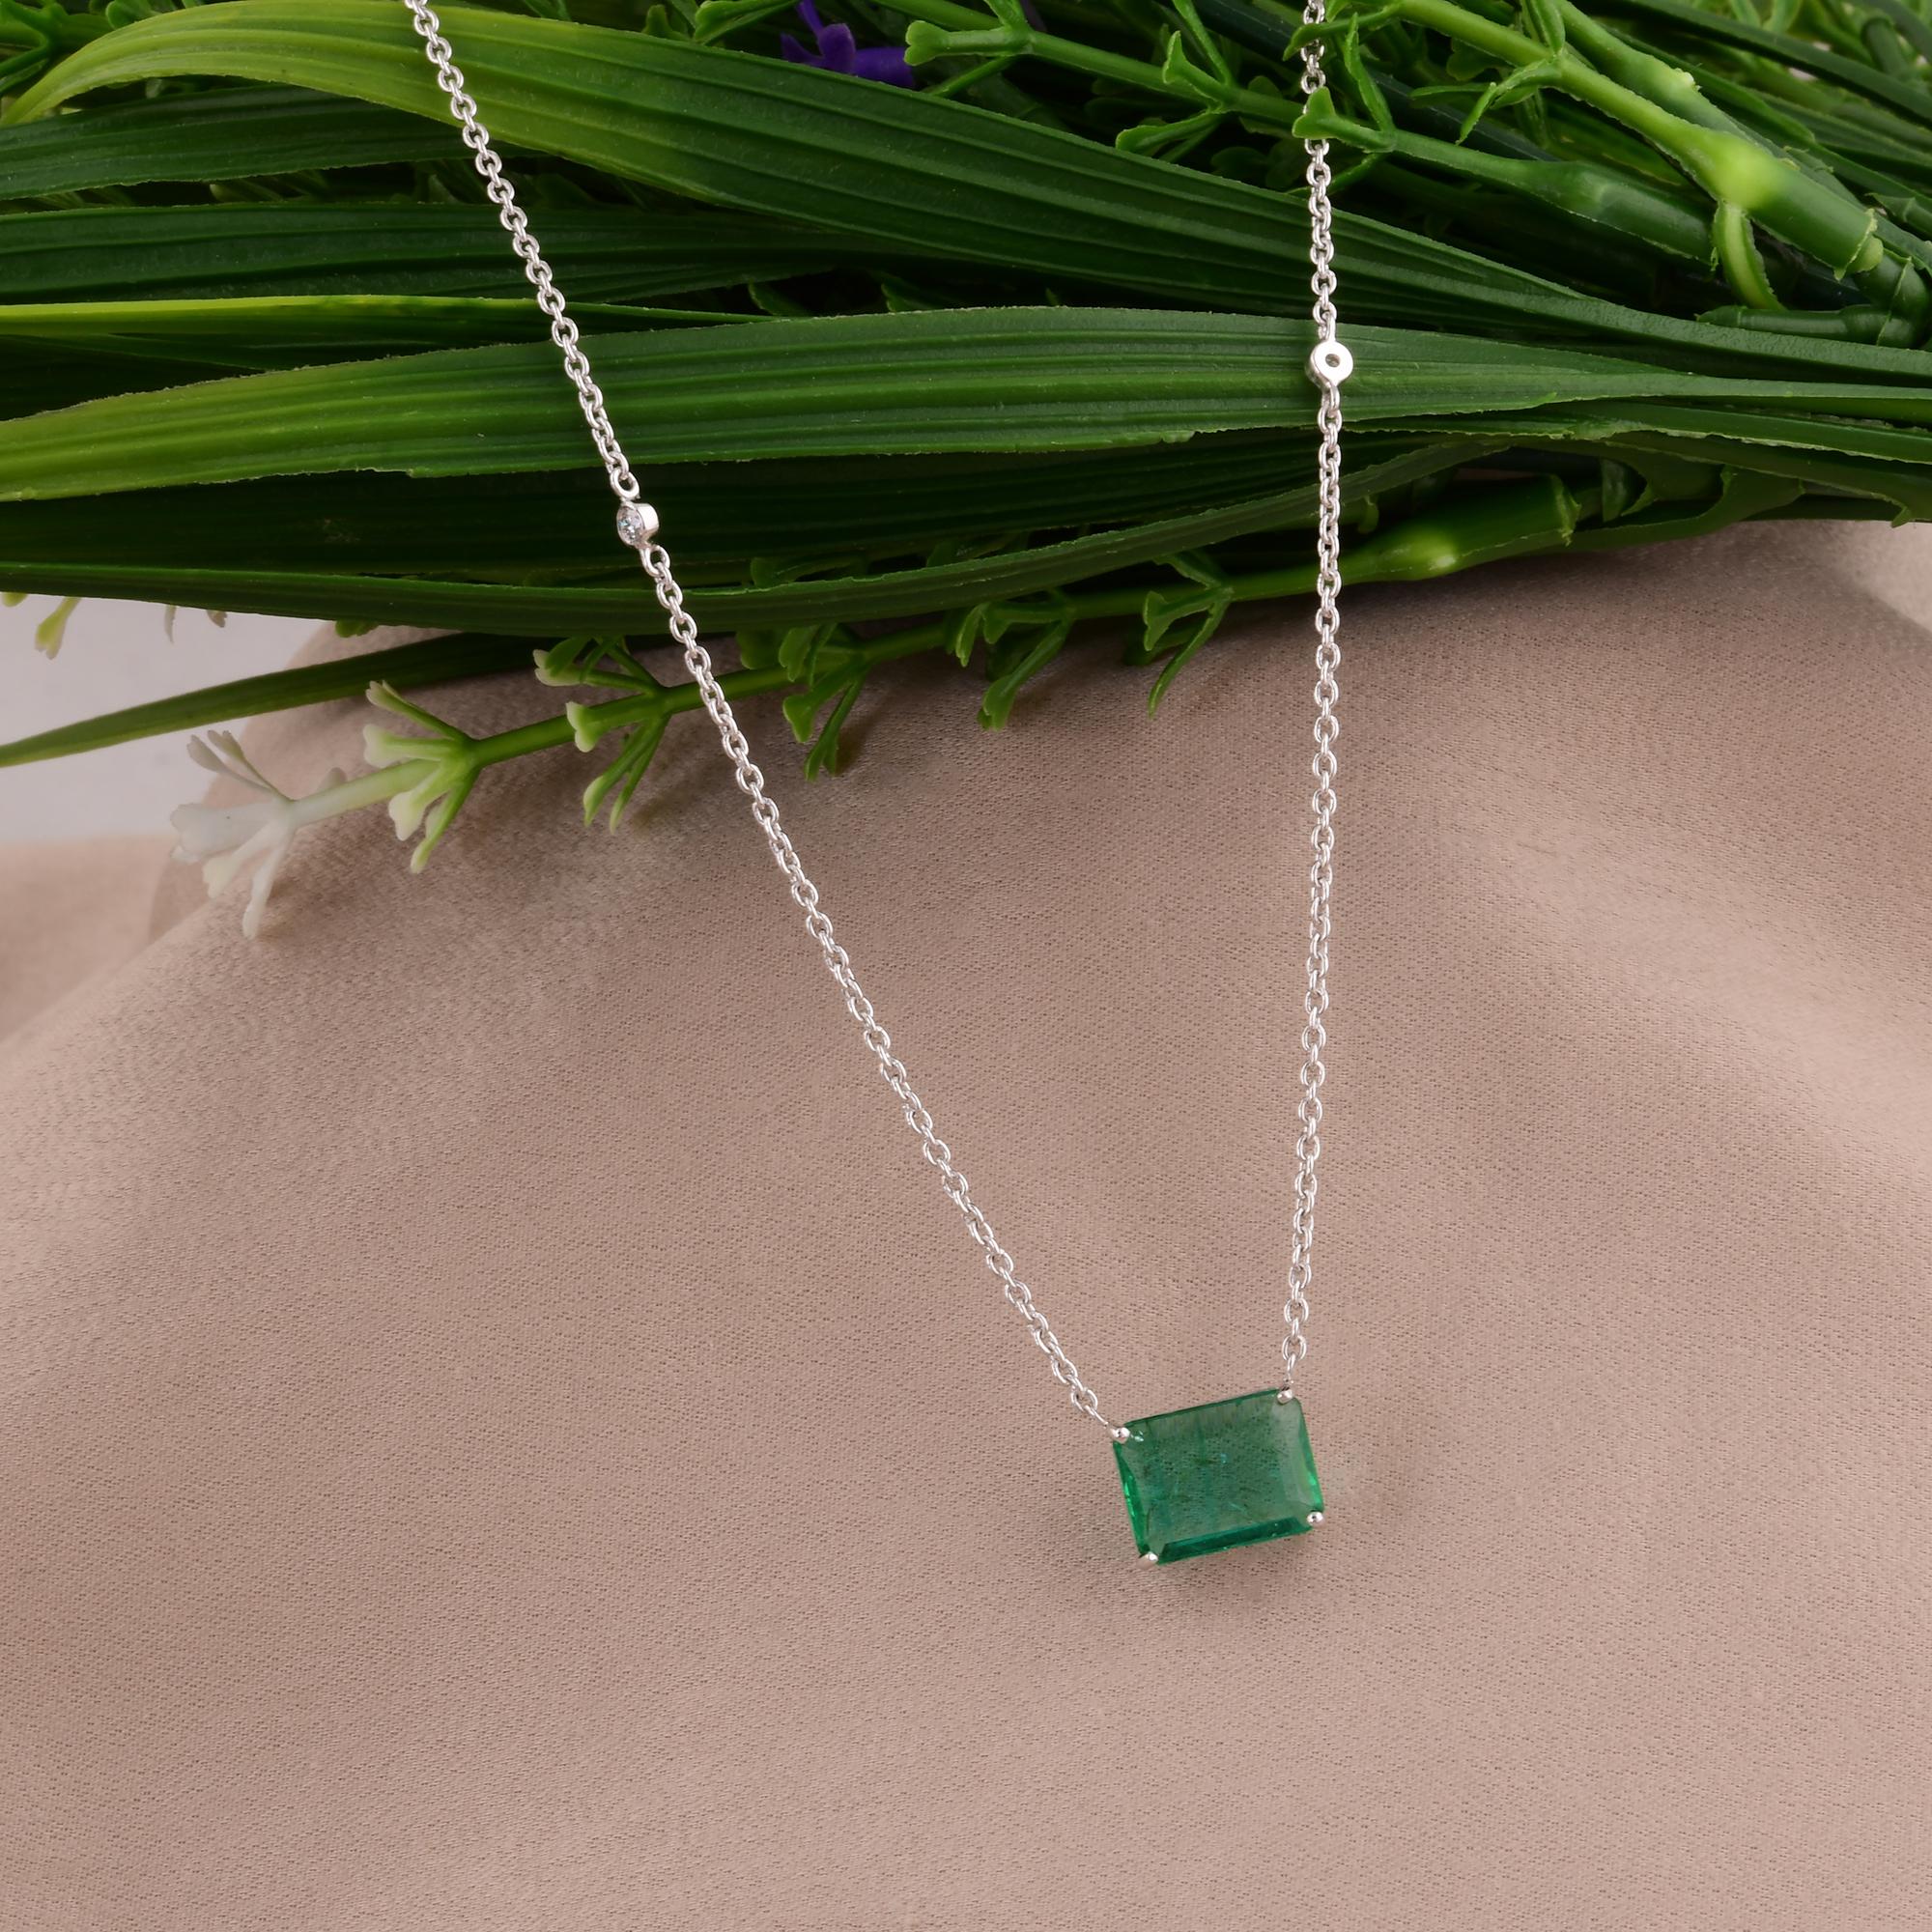 Adorn yourself with timeless elegance and natural beauty with our exquisite Zambian Emerald Gemstone Charm Pendant Necklace, intricately crafted in lustrous 14 Karat White Gold and adorned with genuine diamonds

Item Code :- SEPD-3752 (14k)
Gross